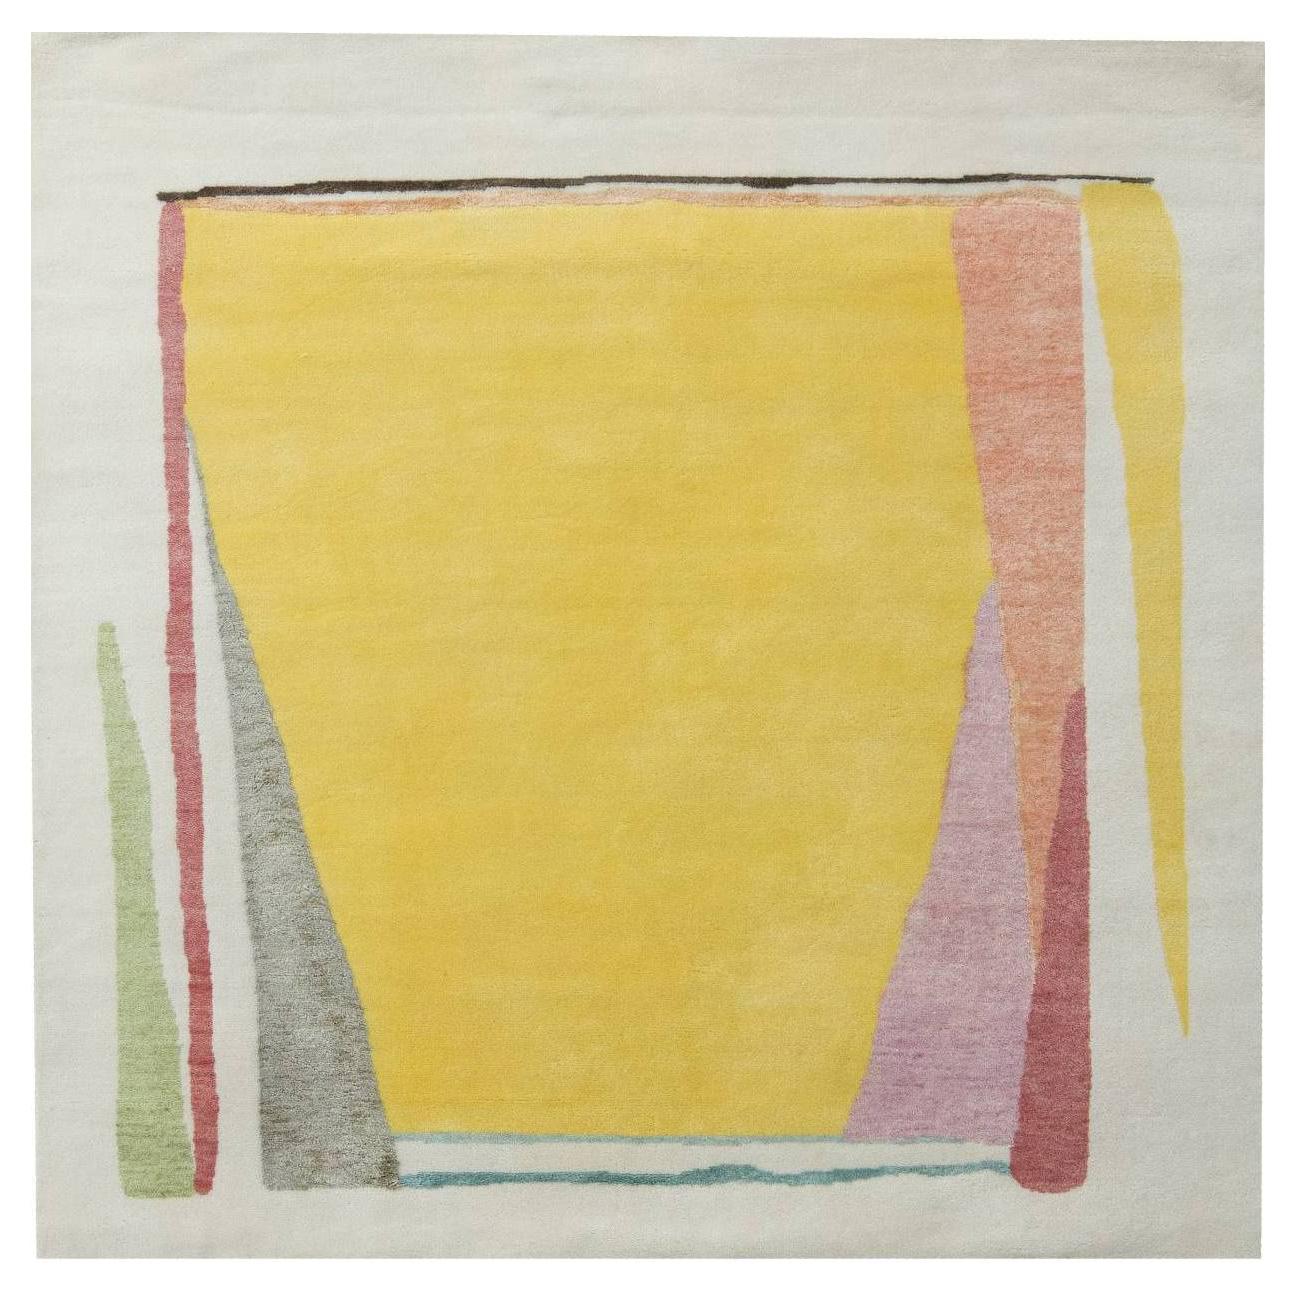  Yellow Abstract Mid Century Modern Rug 5 ft 1 in x 5 ft 2 in